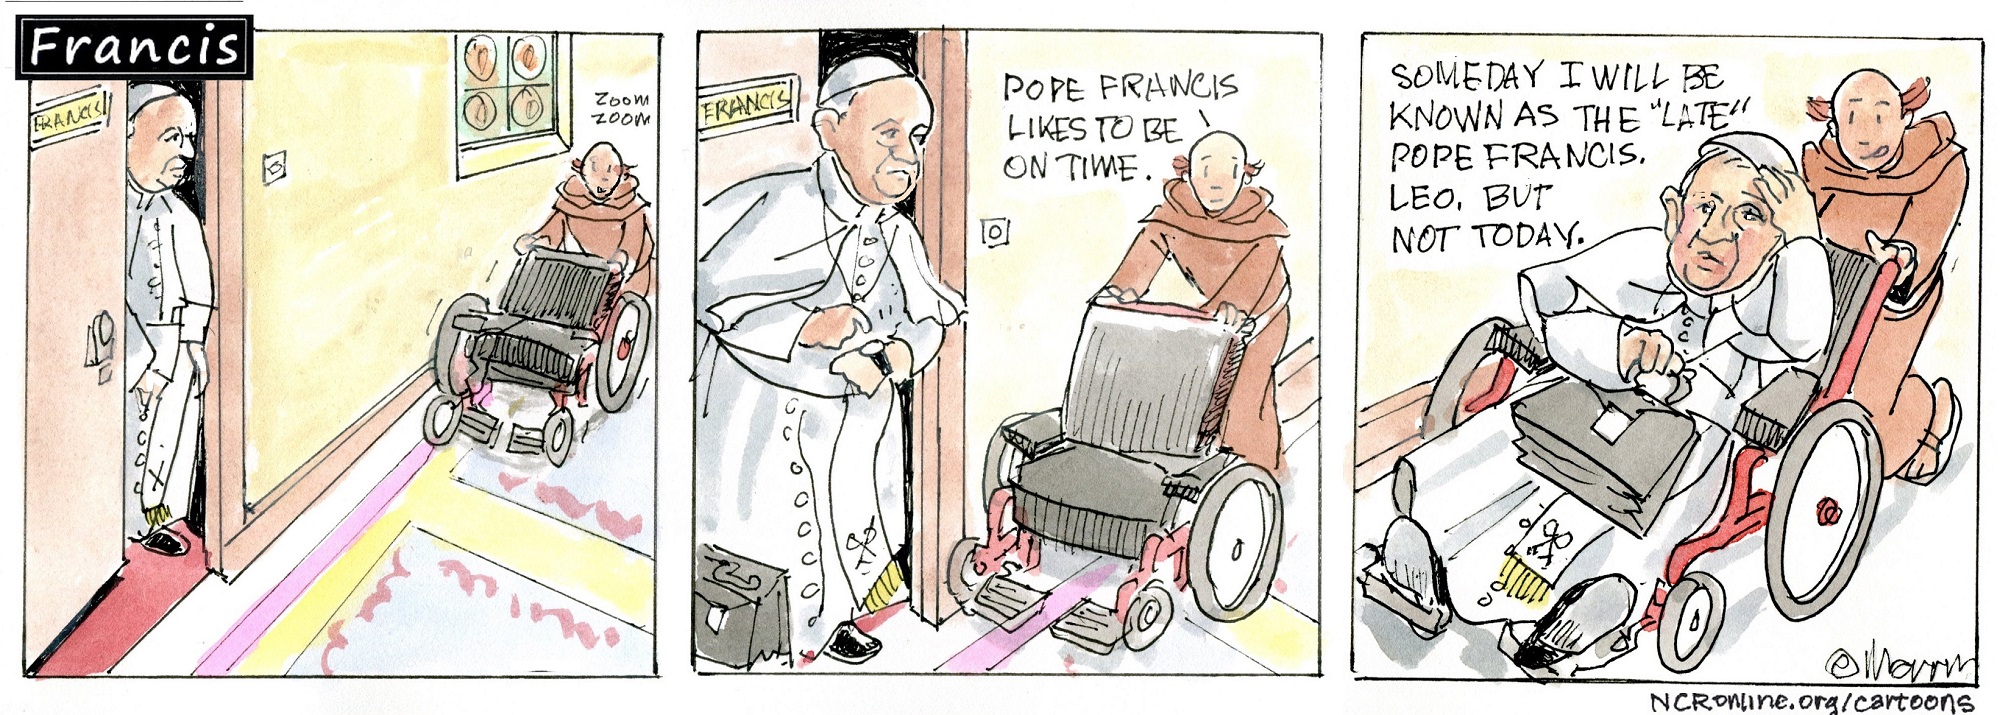 Francis, the comic strip: Francis likes to be on time!